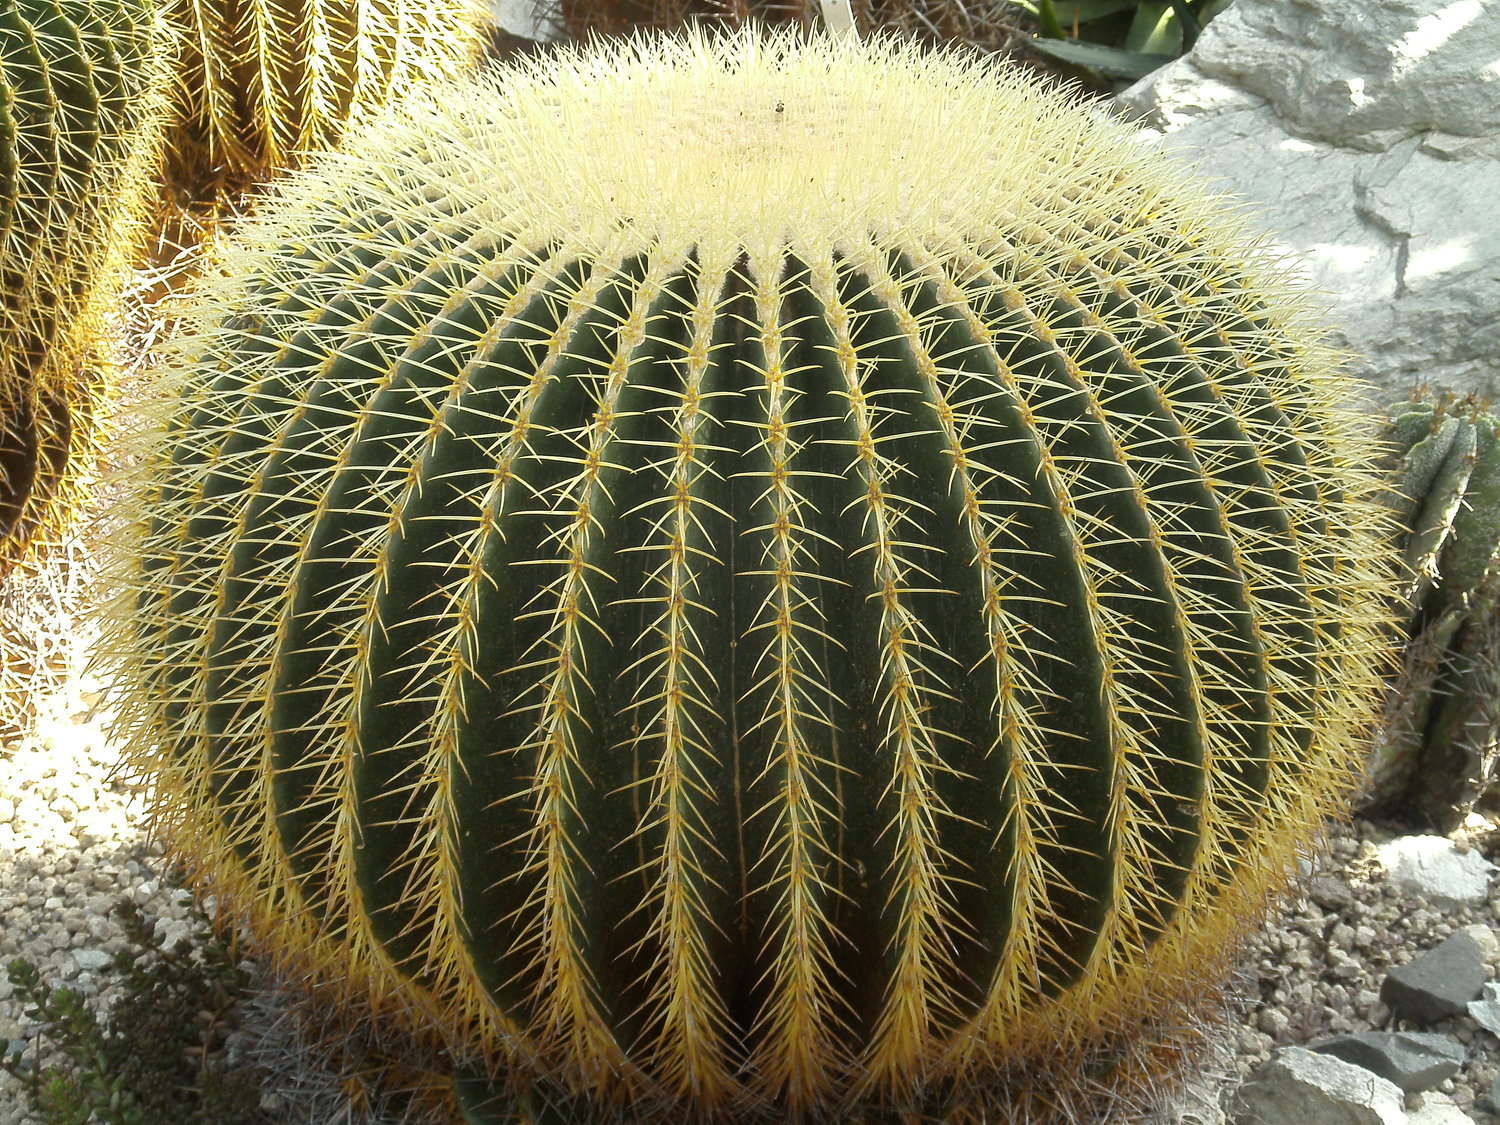 Check Out These Amazing Cactus Species